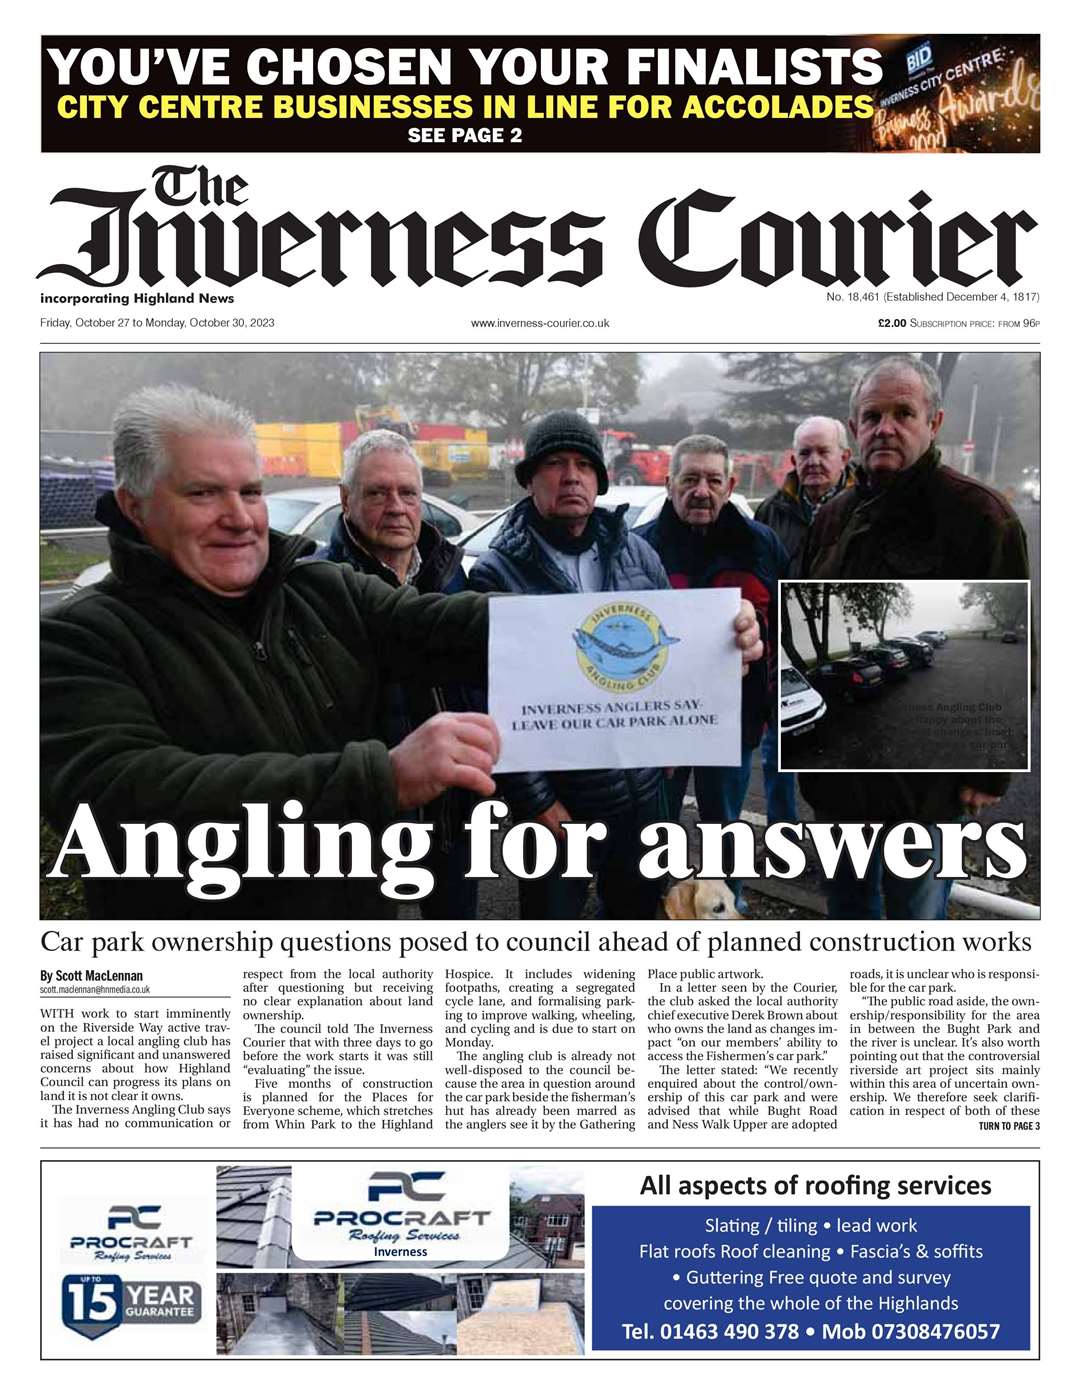 The Inverness Courier, October 27, front page.